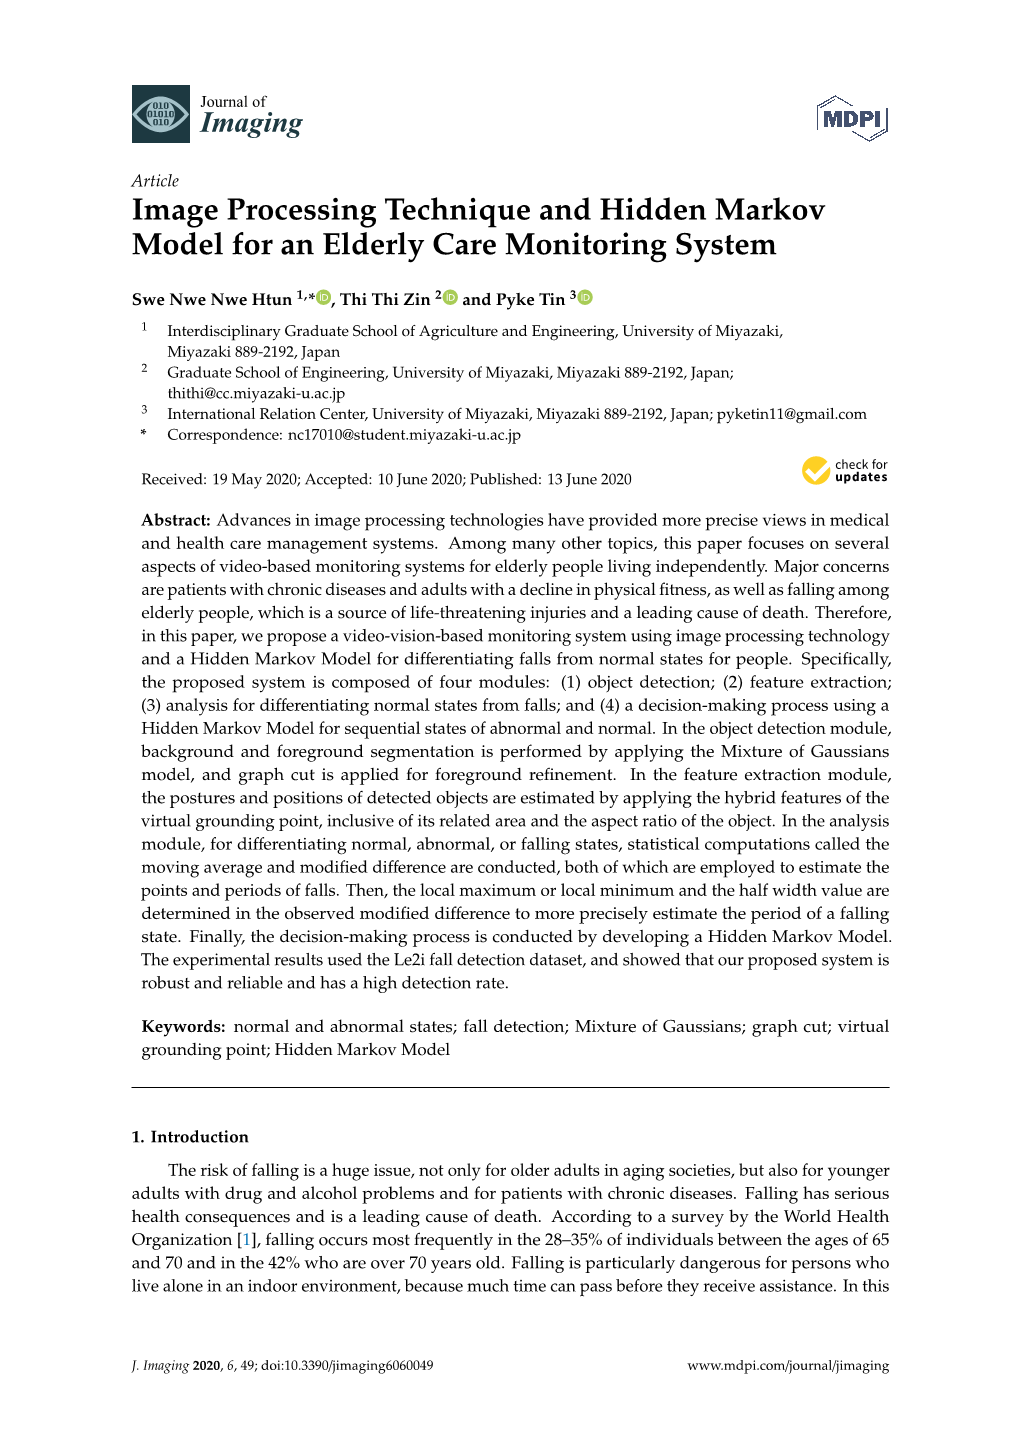 Image Processing Technique and Hidden Markov Model for an Elderly Care Monitoring System